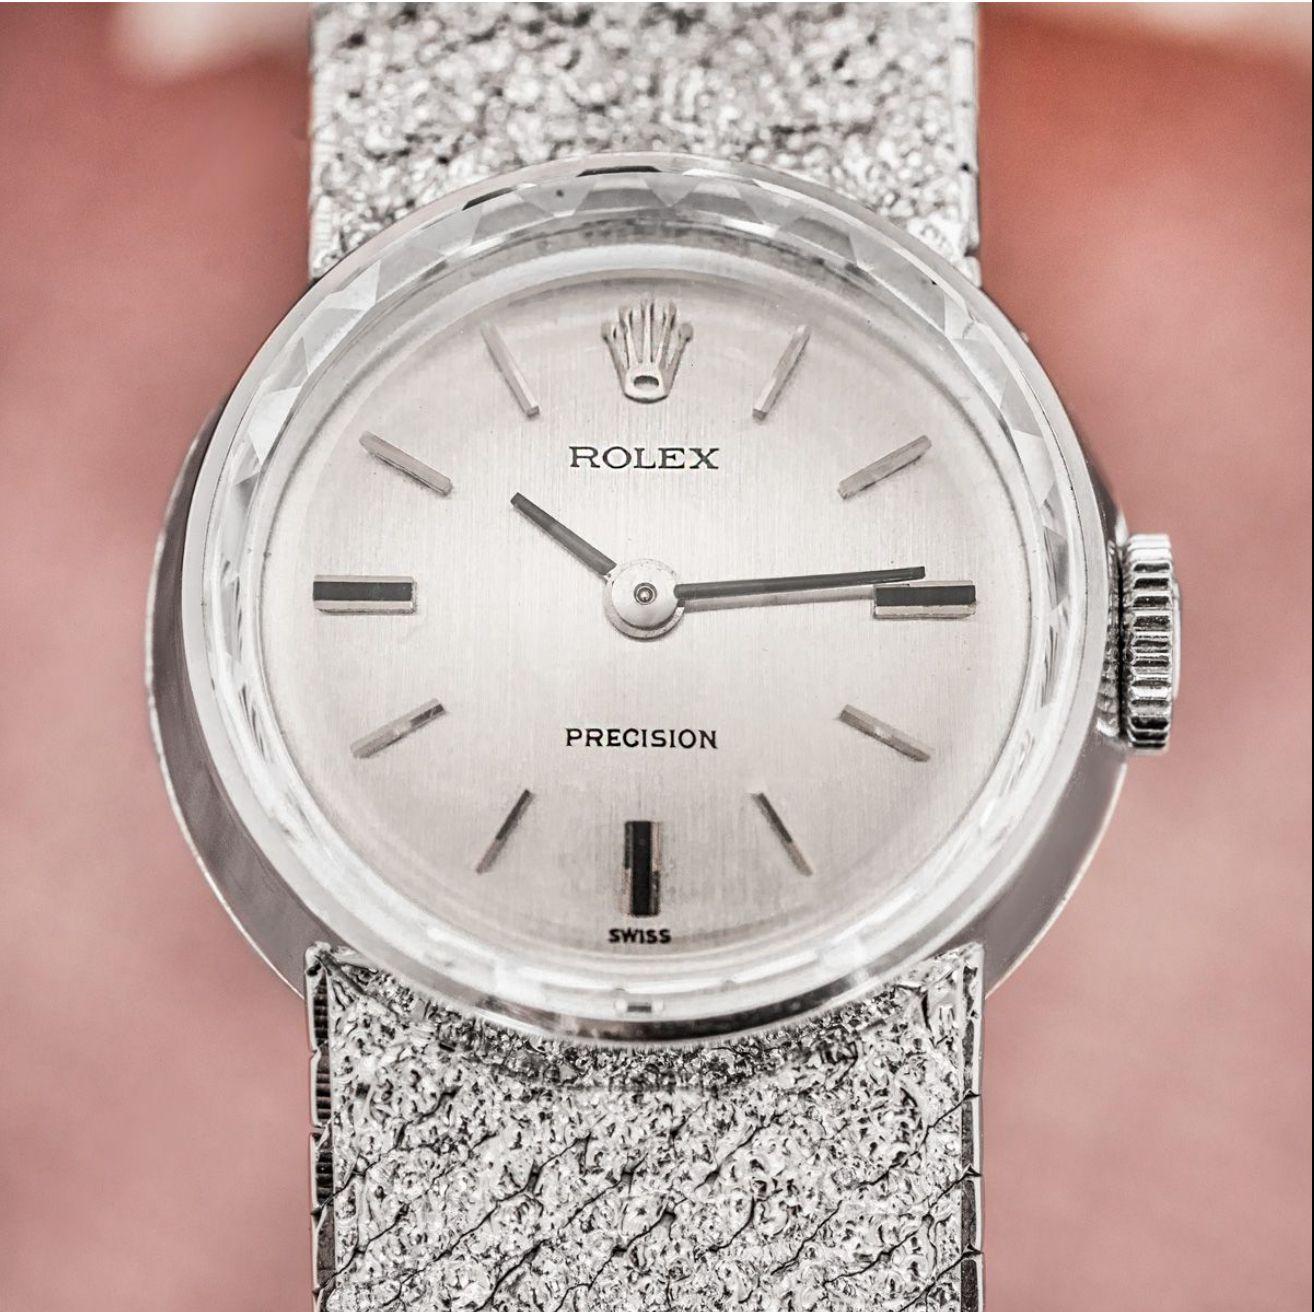 A ladies Rolex Precision white gold wristwatch. Featuring a silver dial with applied hour markers.

The watch is equipped with an integral white gold bark effect bracelet and a white gold jewellery style clasp. Fitted with a plastic glass and a